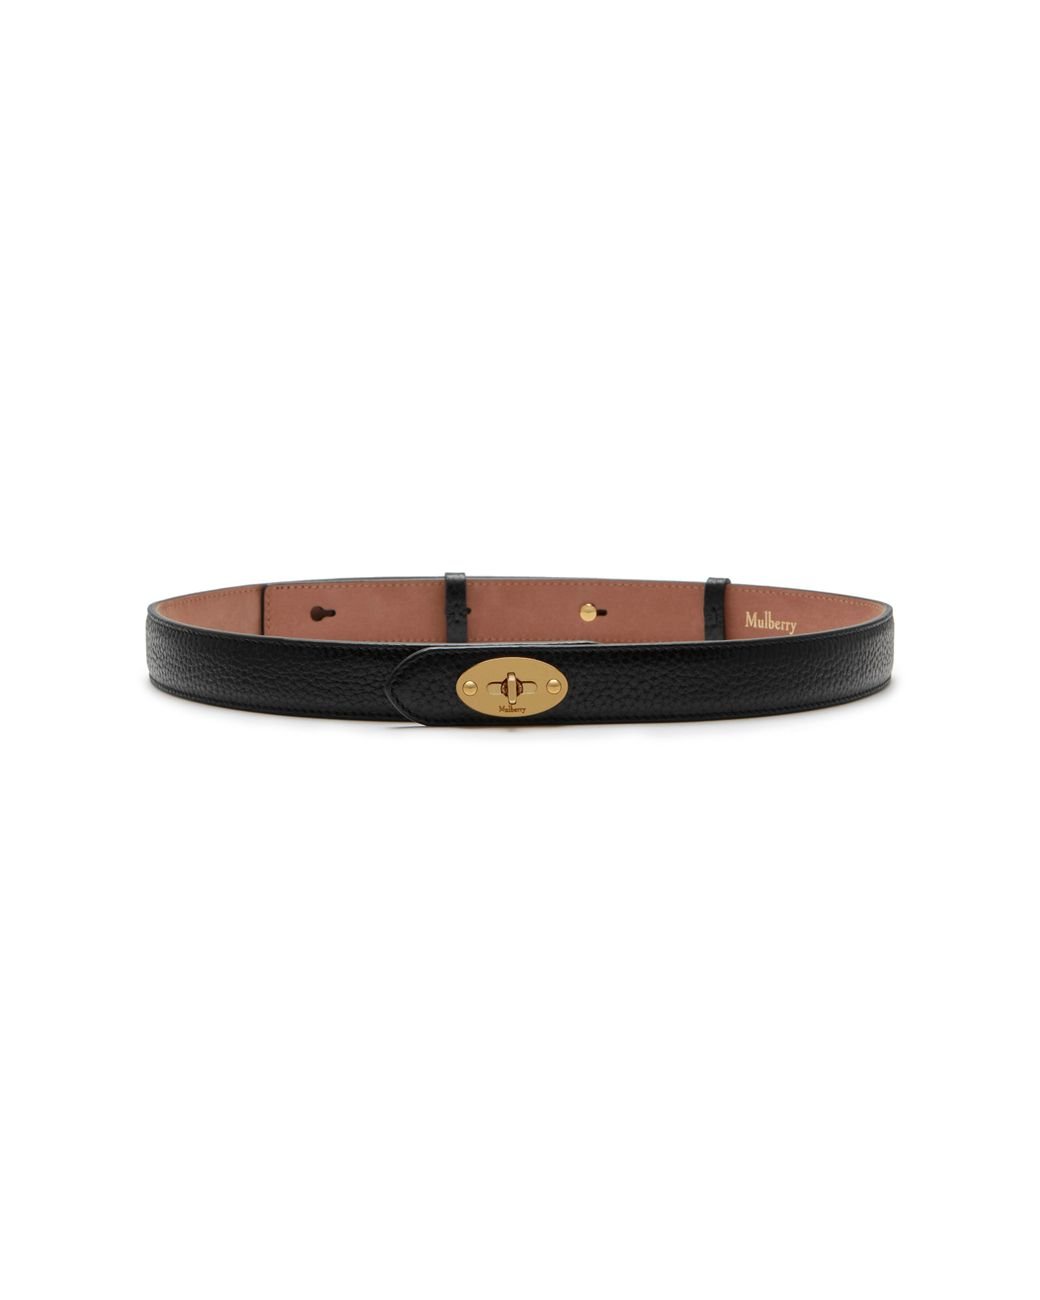 Mulberry Darley Belt In Black Natural Grain Leather | Lyst UK